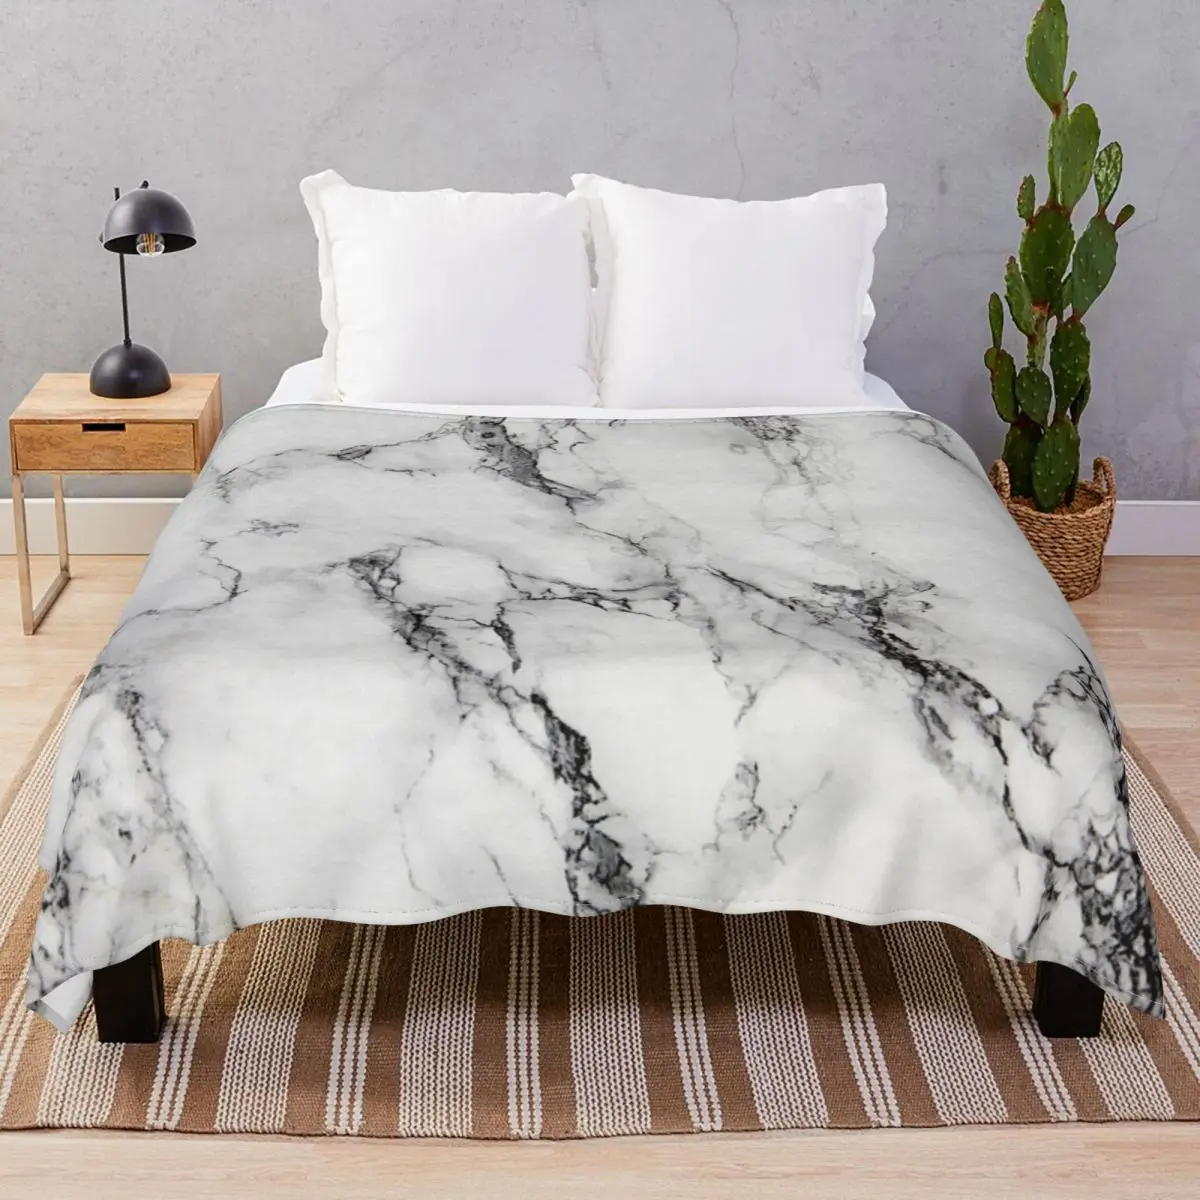 White Marble Blanket Coral Fleece Plush Print Fluffy Throw Blankets for Bed Home Couch Travel Office